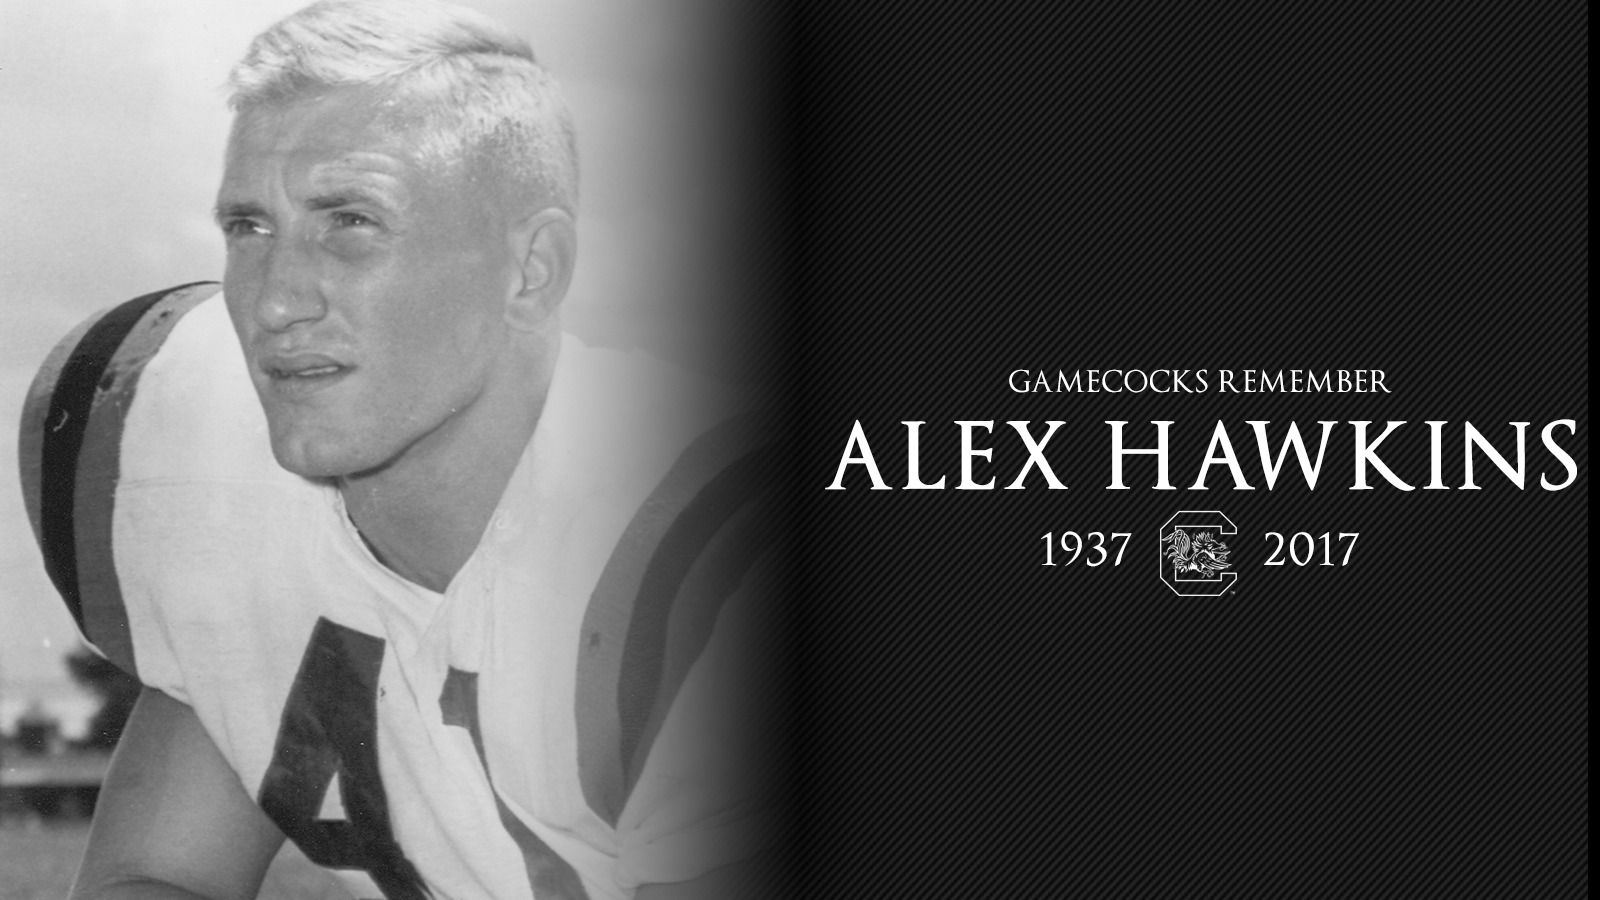 Gamecocks Mourn the Passing of Football Great Alex Hawkins